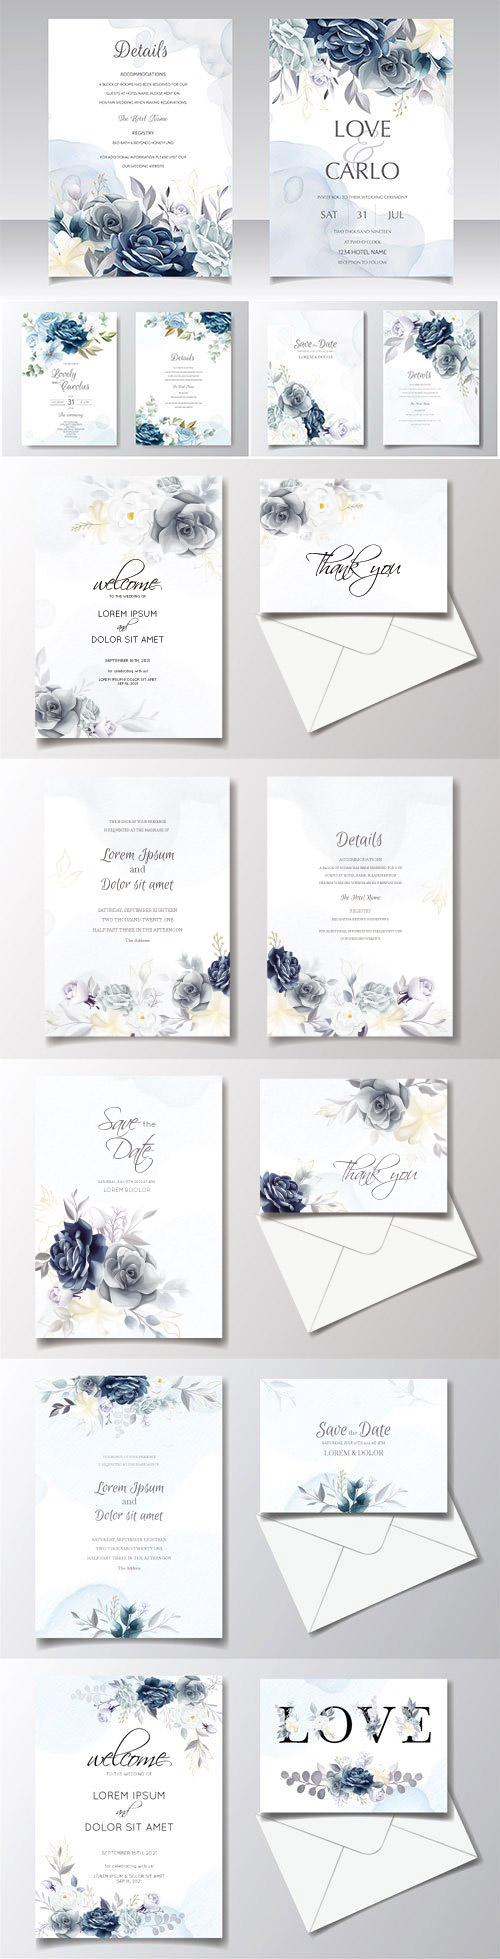 Navy blue floral wedding invitation card template with watercolor frame